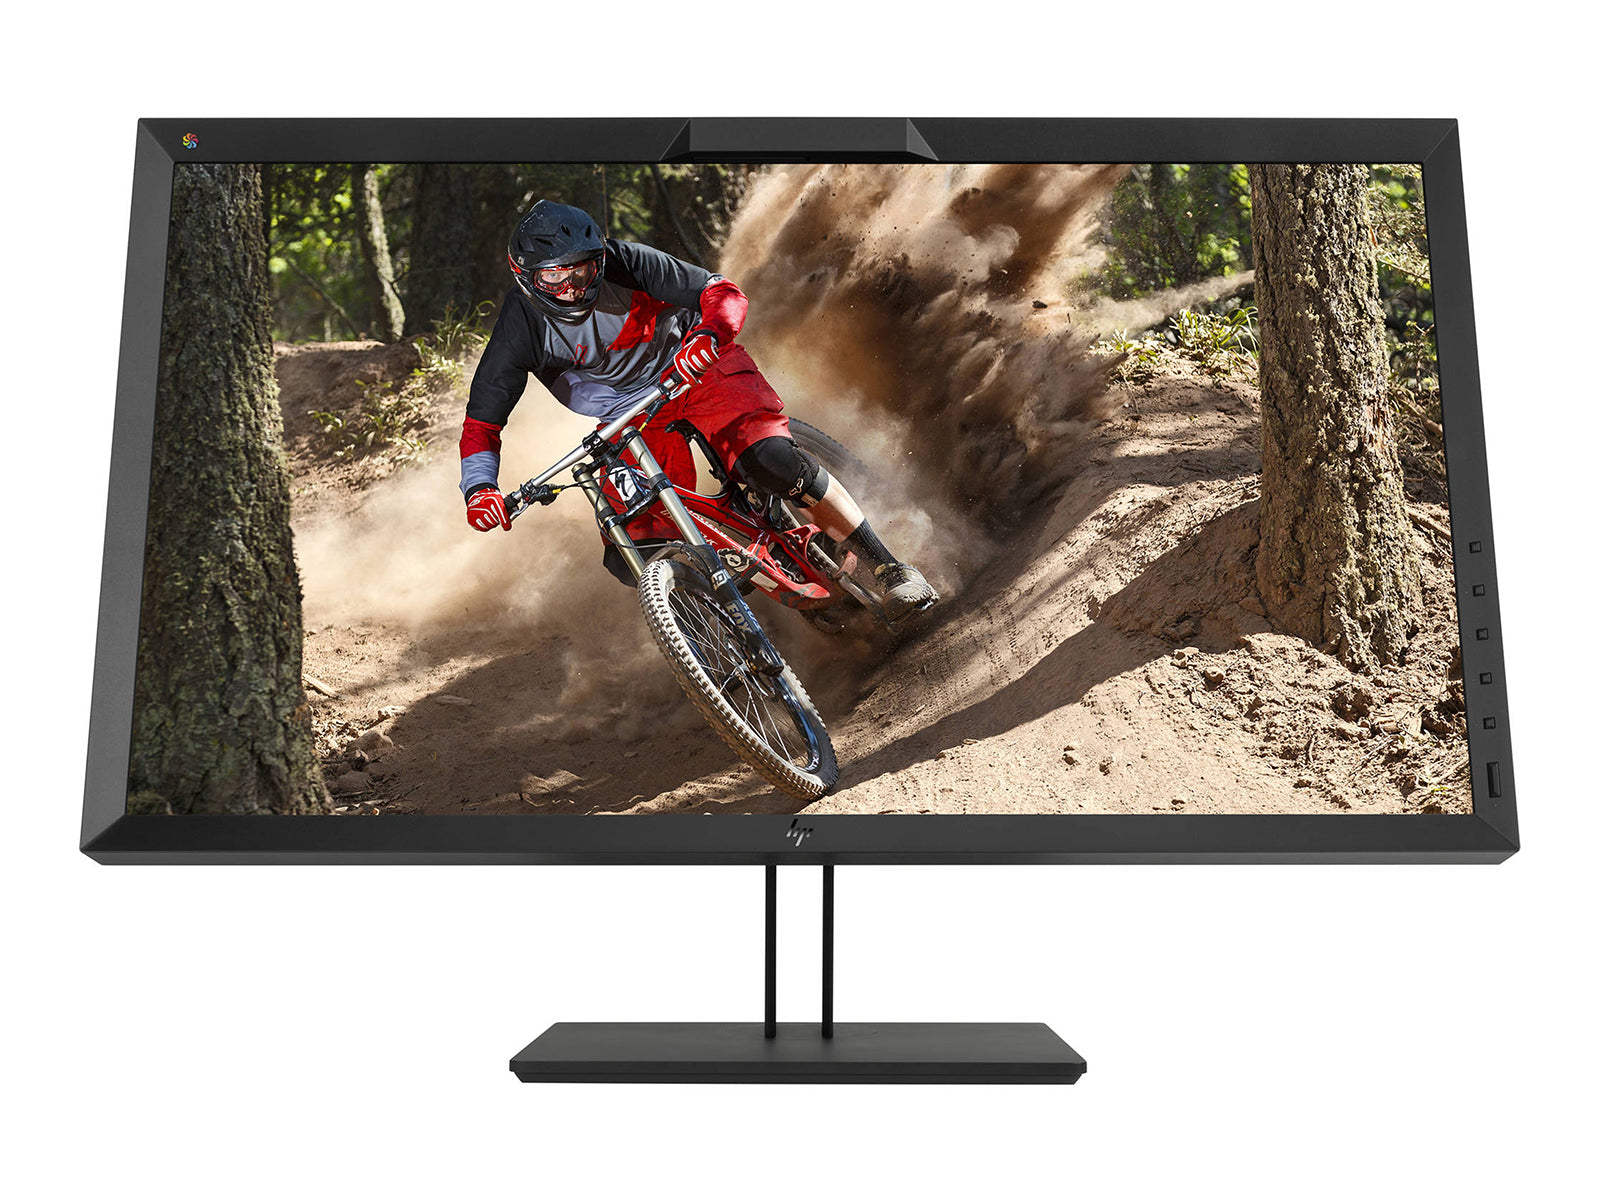 HP DreamColor Z31x 4K 31 インチ カラー LED ディスプレイ モニター (Z4Y82A8#ABA) Monitors.com